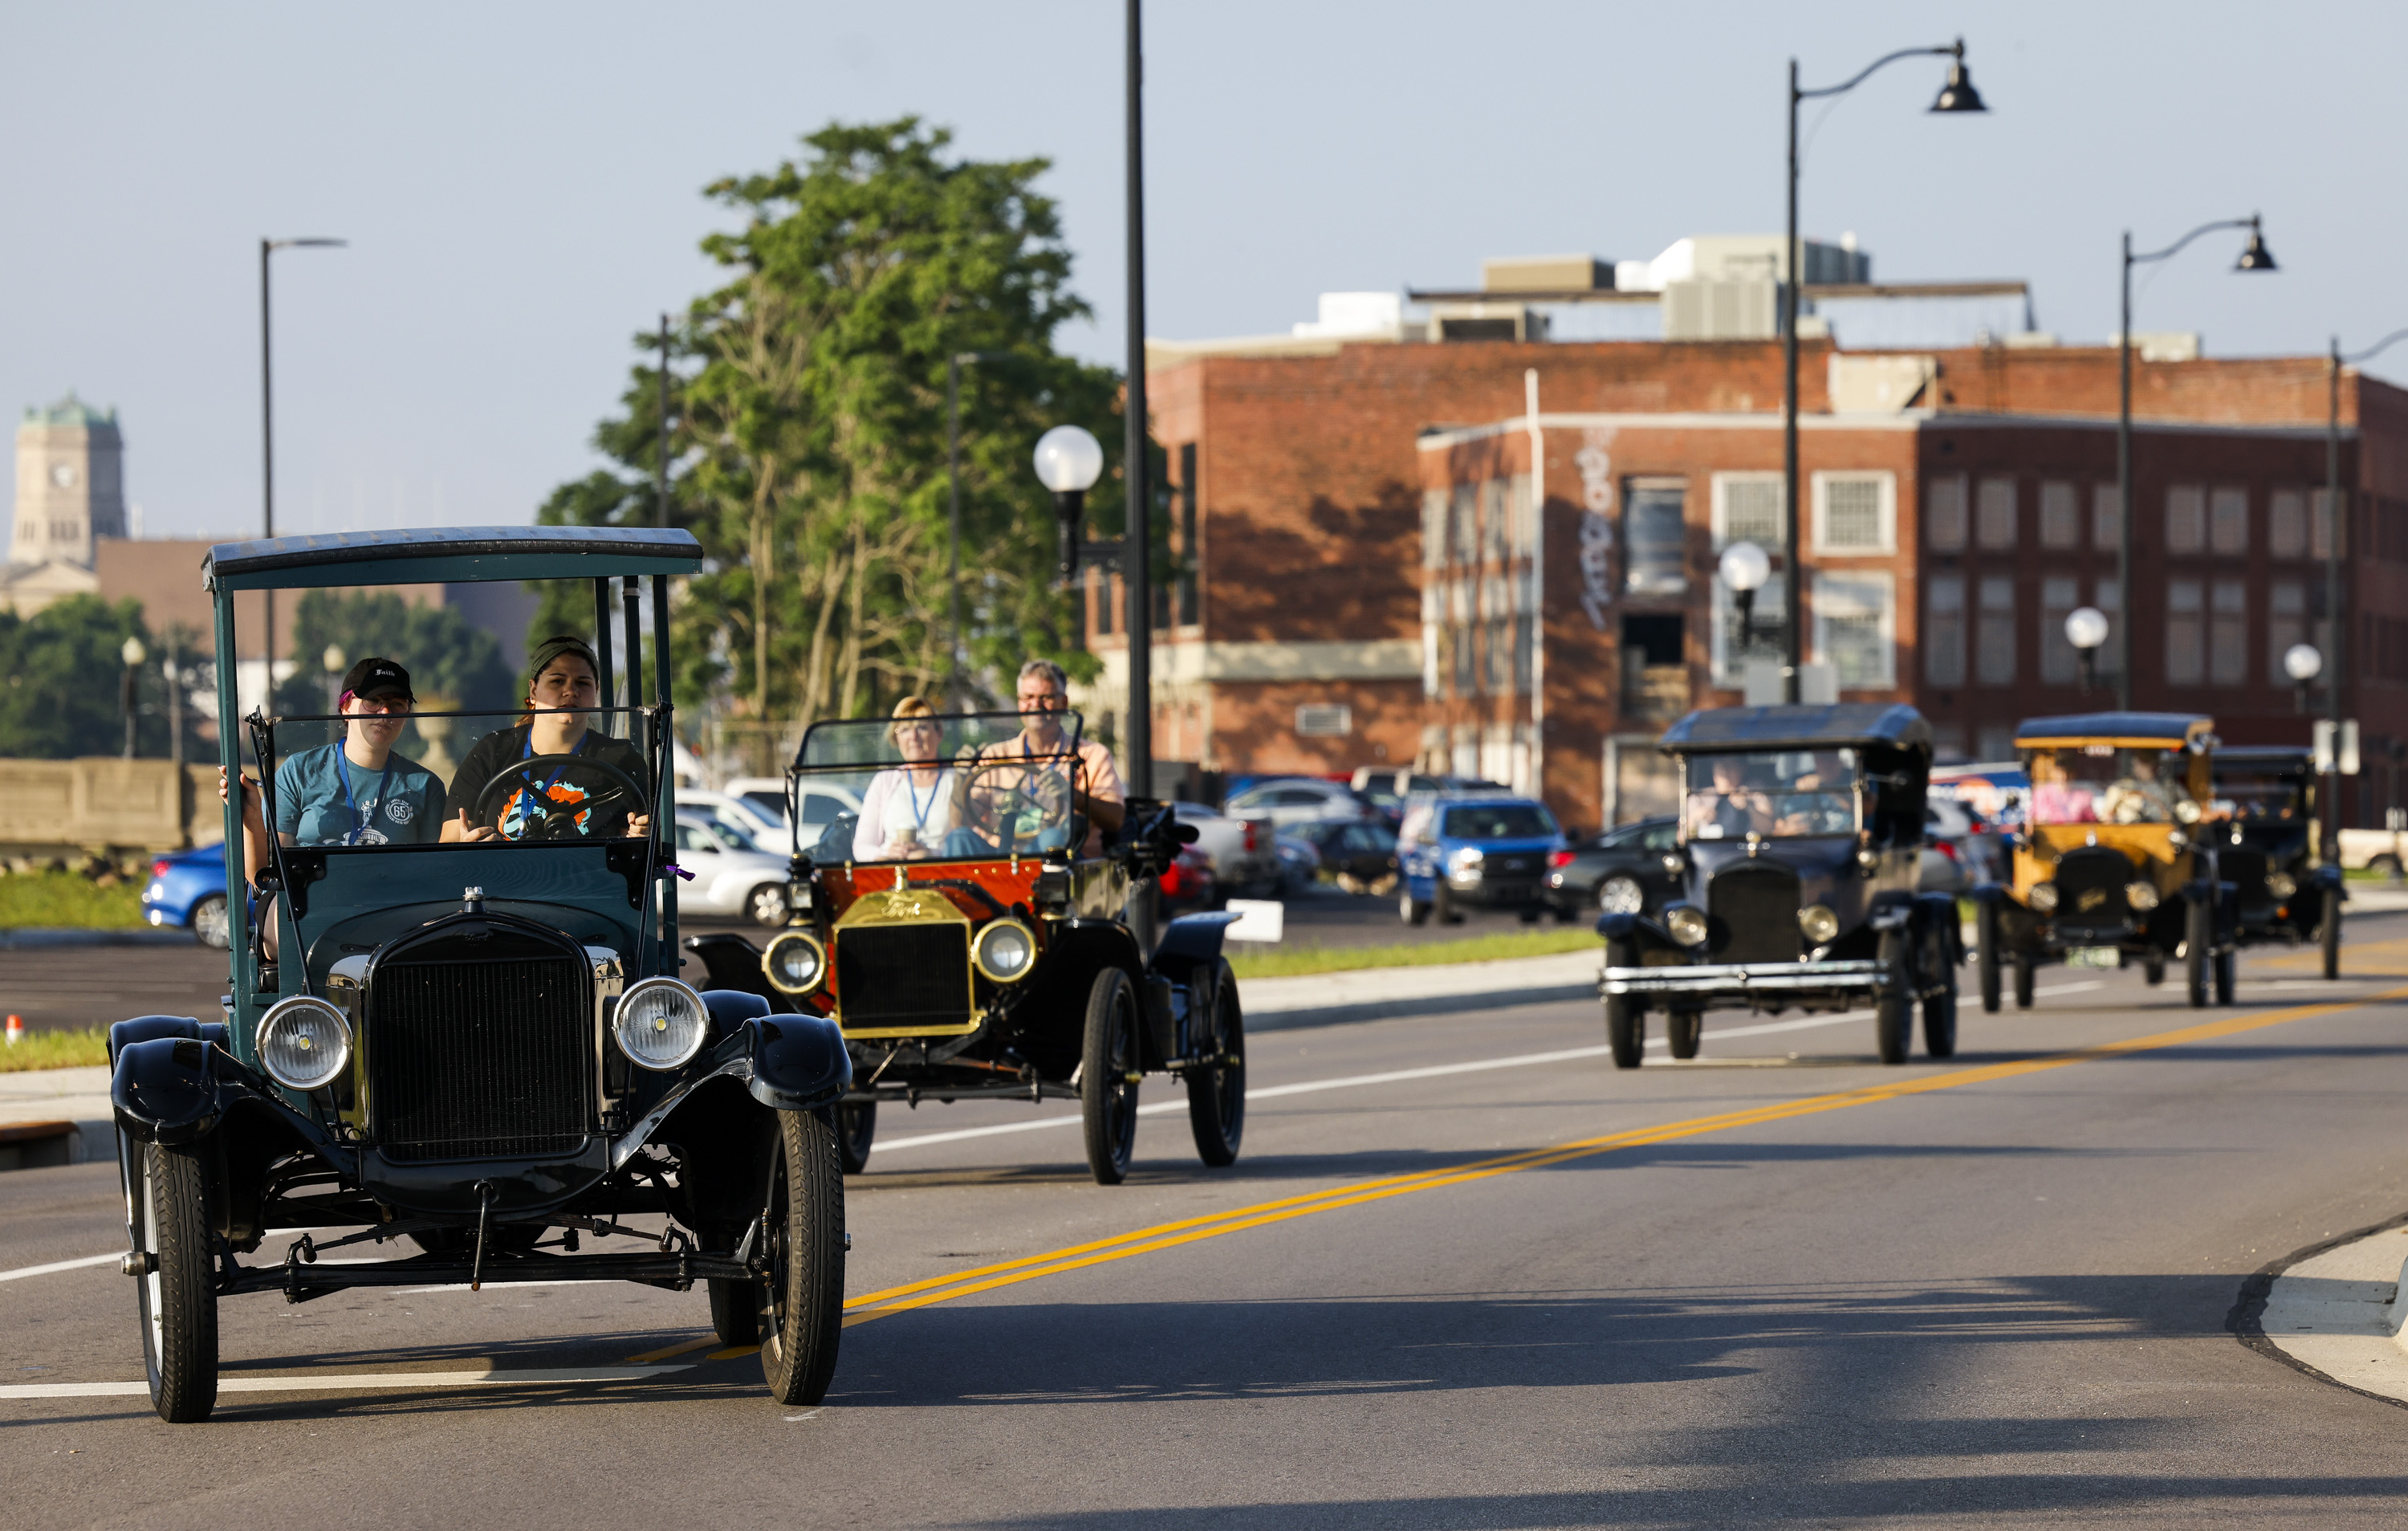 Over 200 Model T Ford vehicles gathered at Spooky Nook Sports Champion Mill in Hamilton for The Model T Ford Club International 65th Annual Tour July 17-22. NICK GRAHAM/STAFF